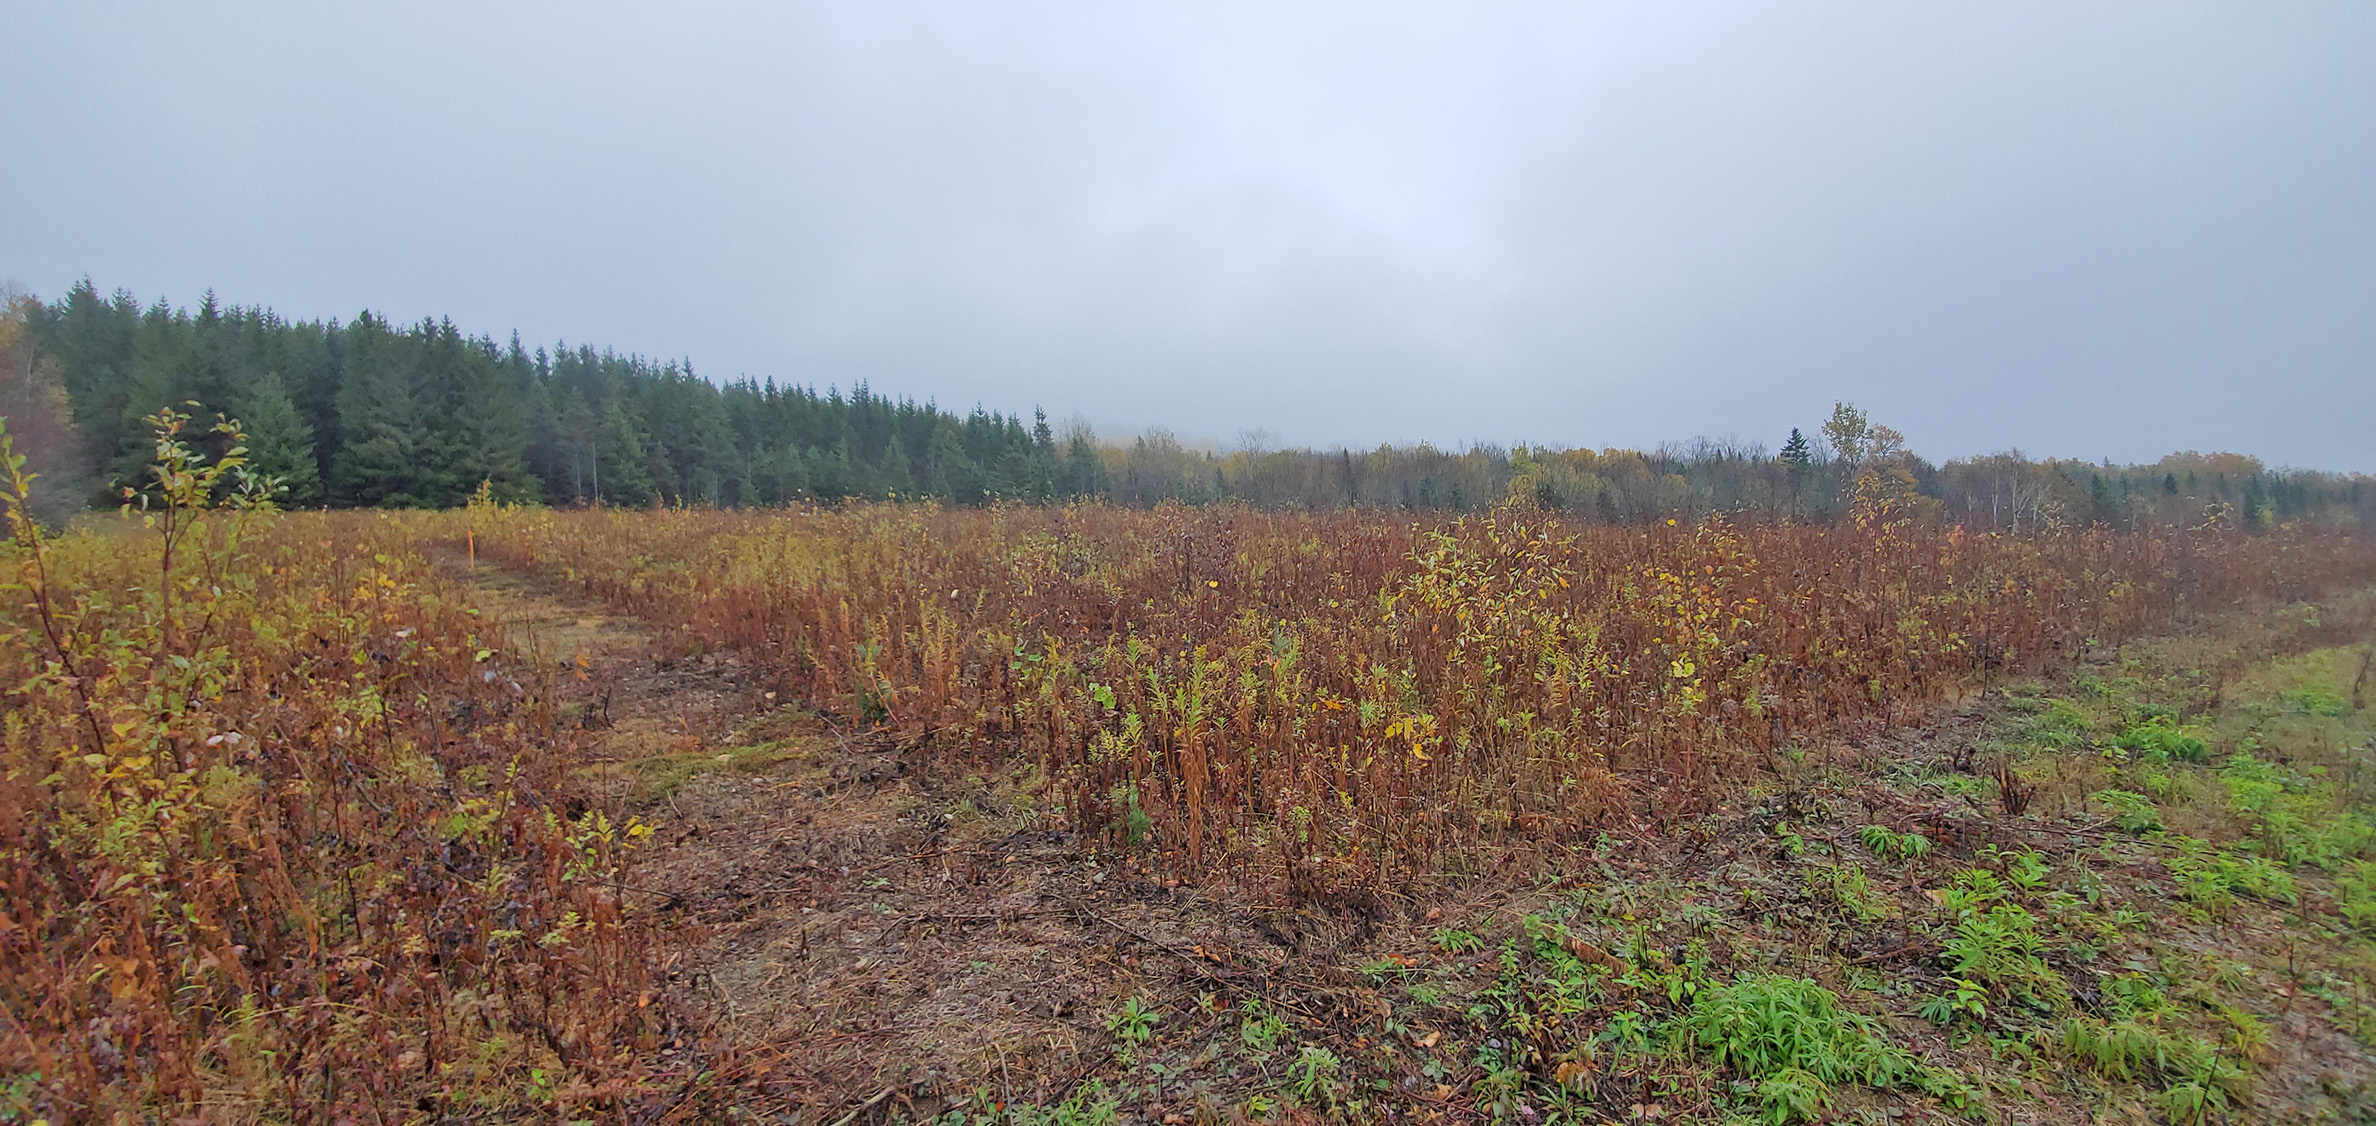 Under a gray sky, the plants in this meadow have turned brown and yellow-green in the late fall